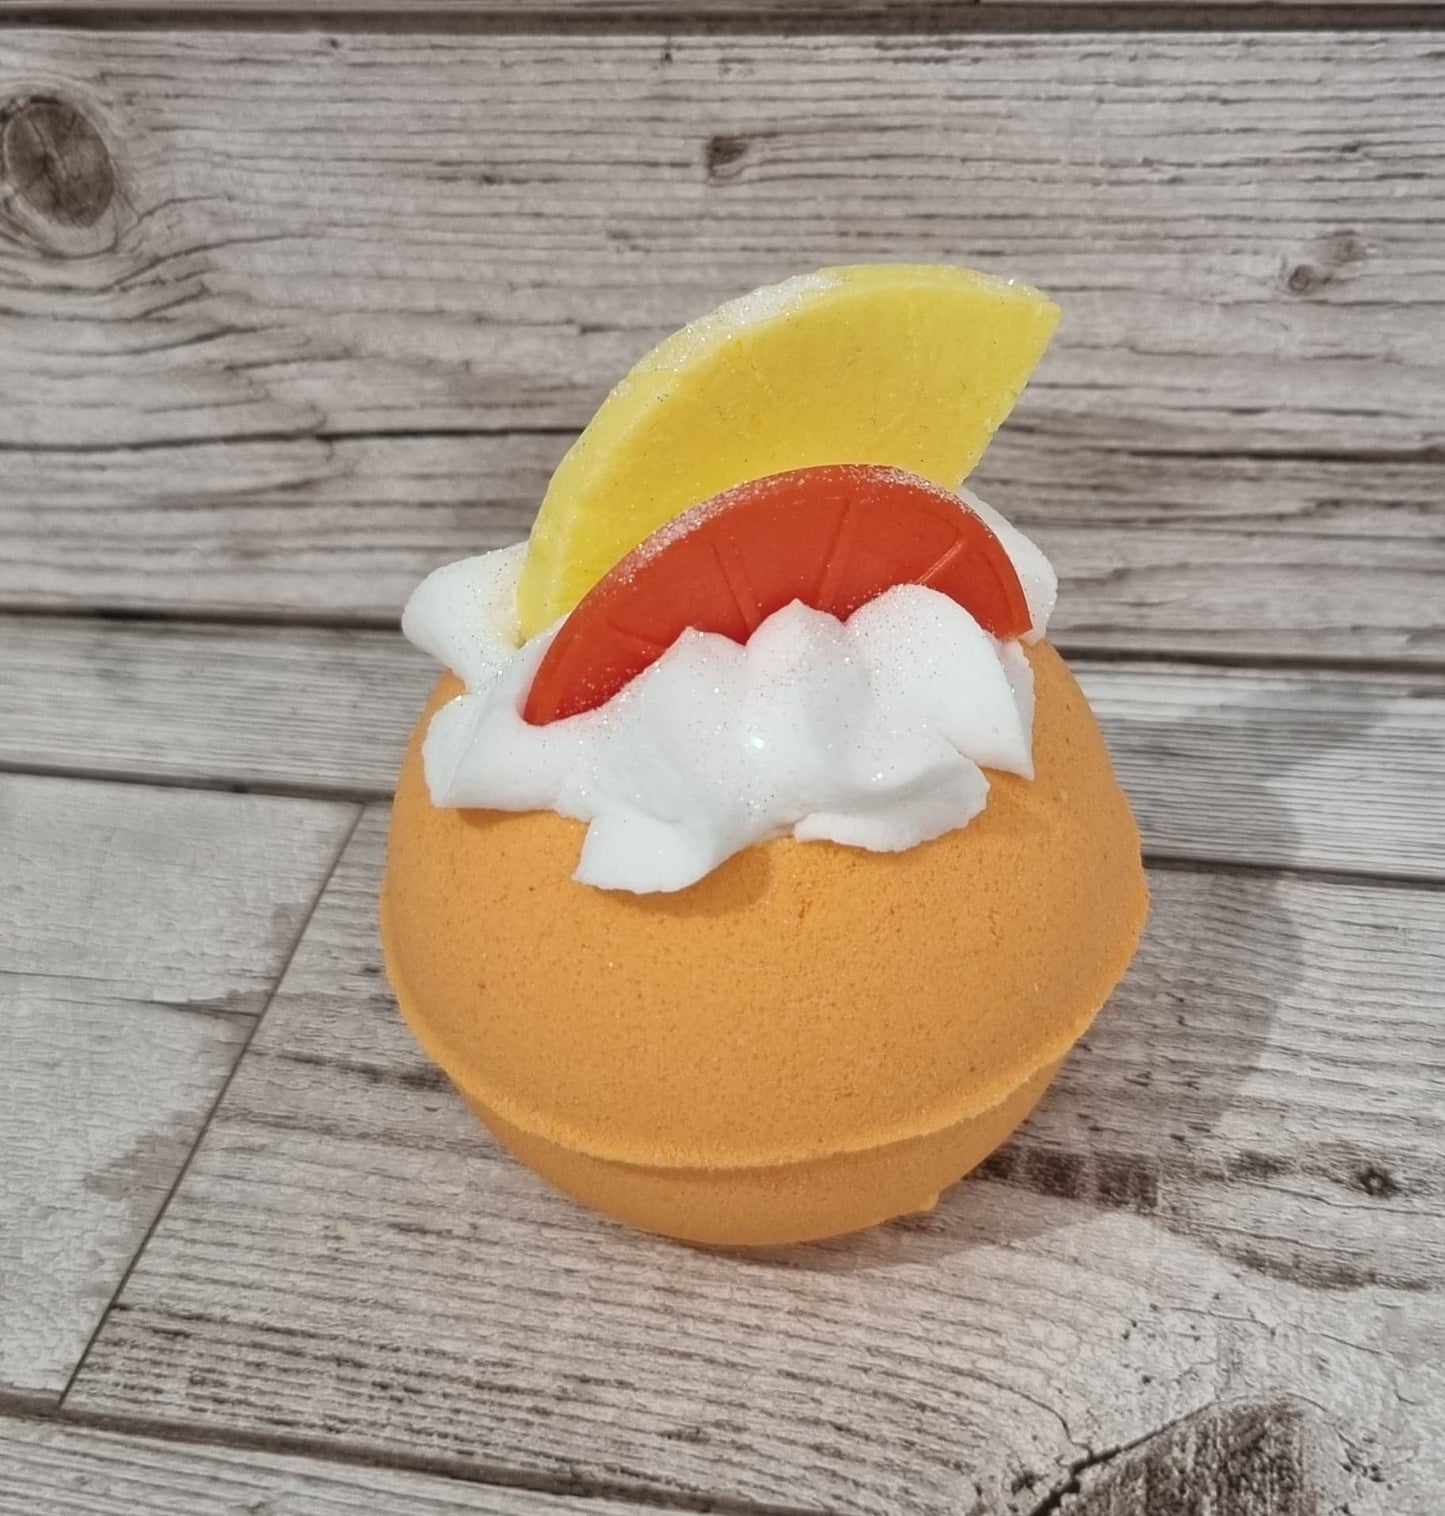 'Fruit Salad' Whipped Top Bath Bomb